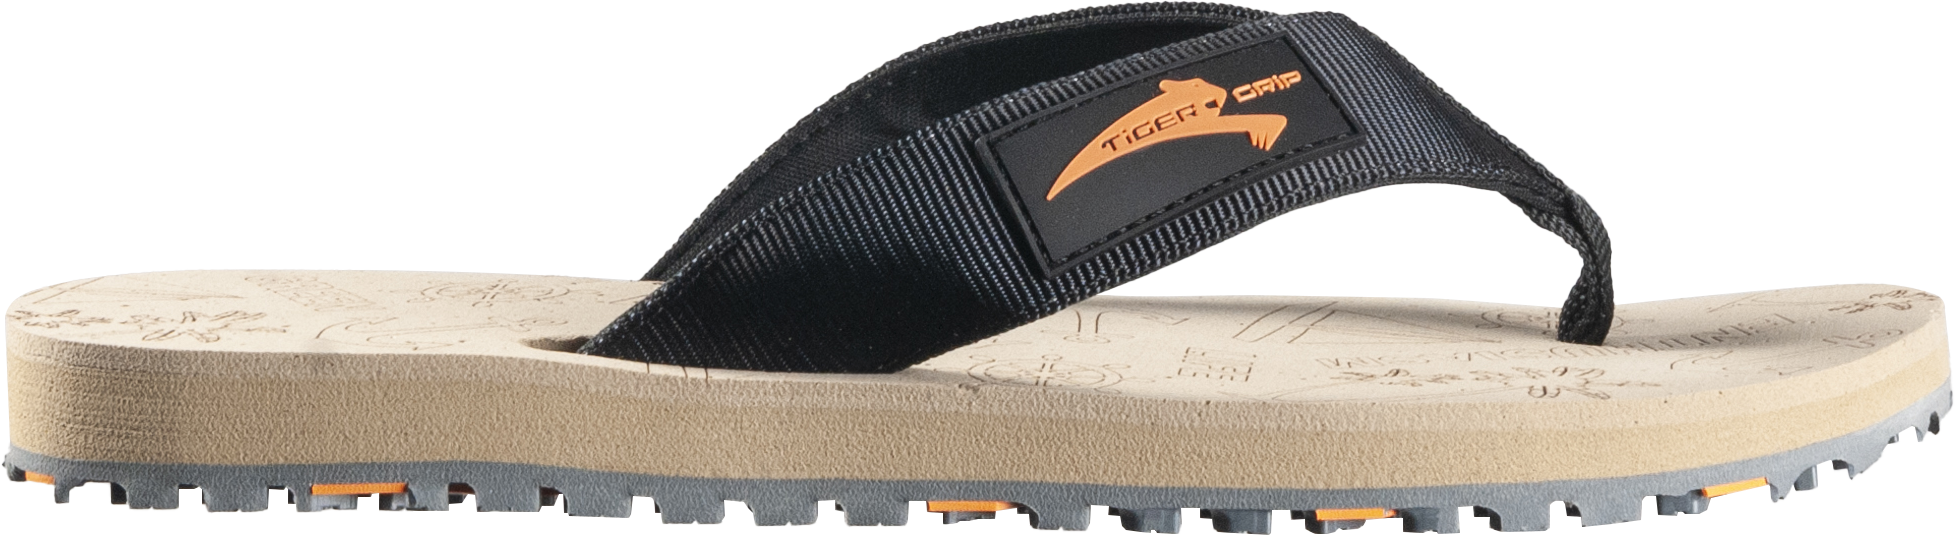 Tong antiderapante professionnelle Skipper Tiger Grip Chaussures-pro.fr